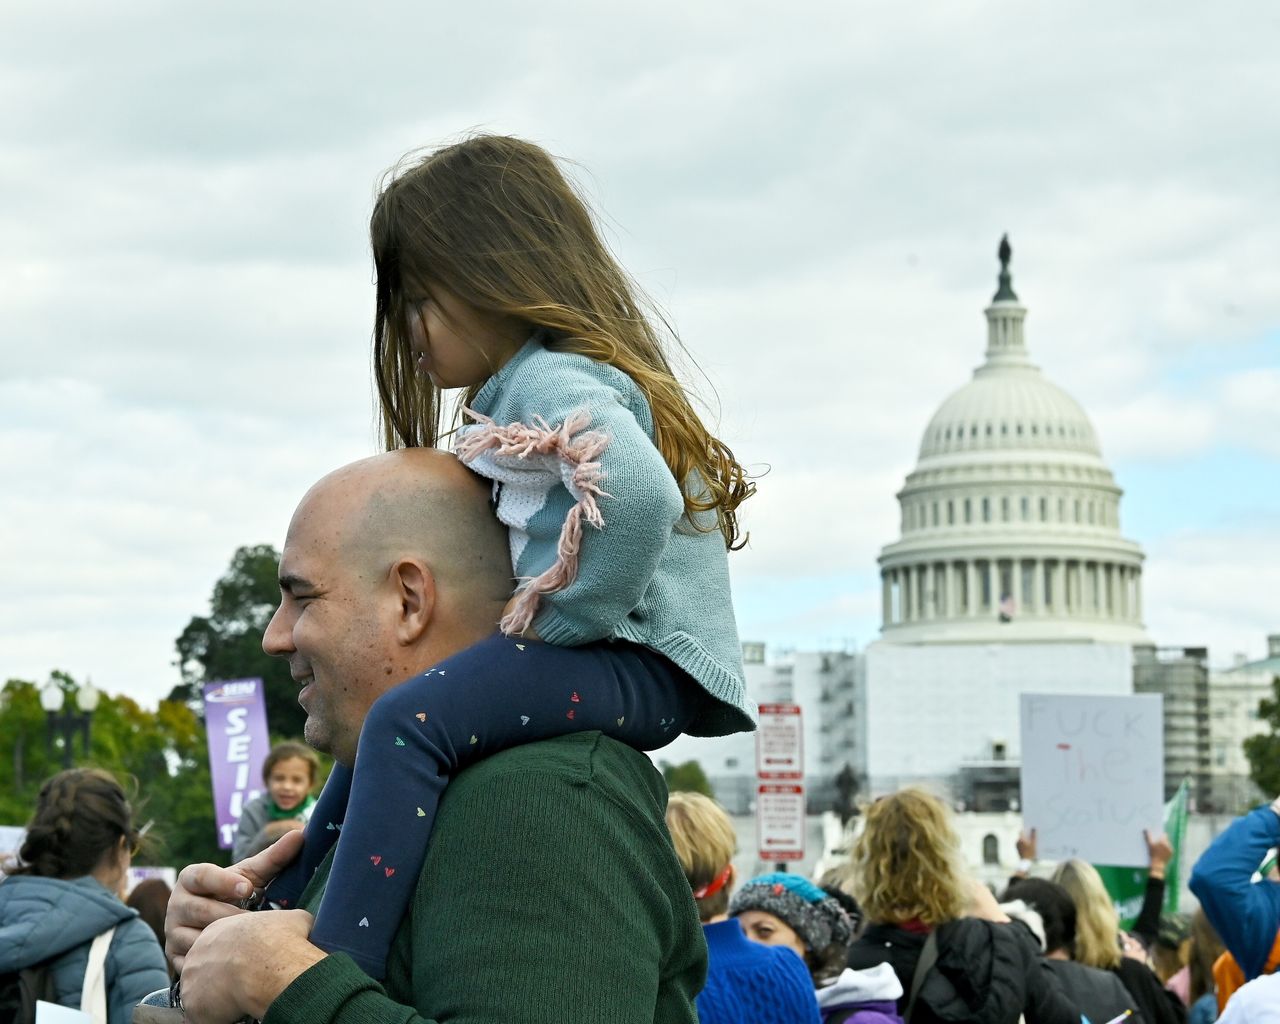 A young girl surveys the crowd from up high in Washington, D.C.